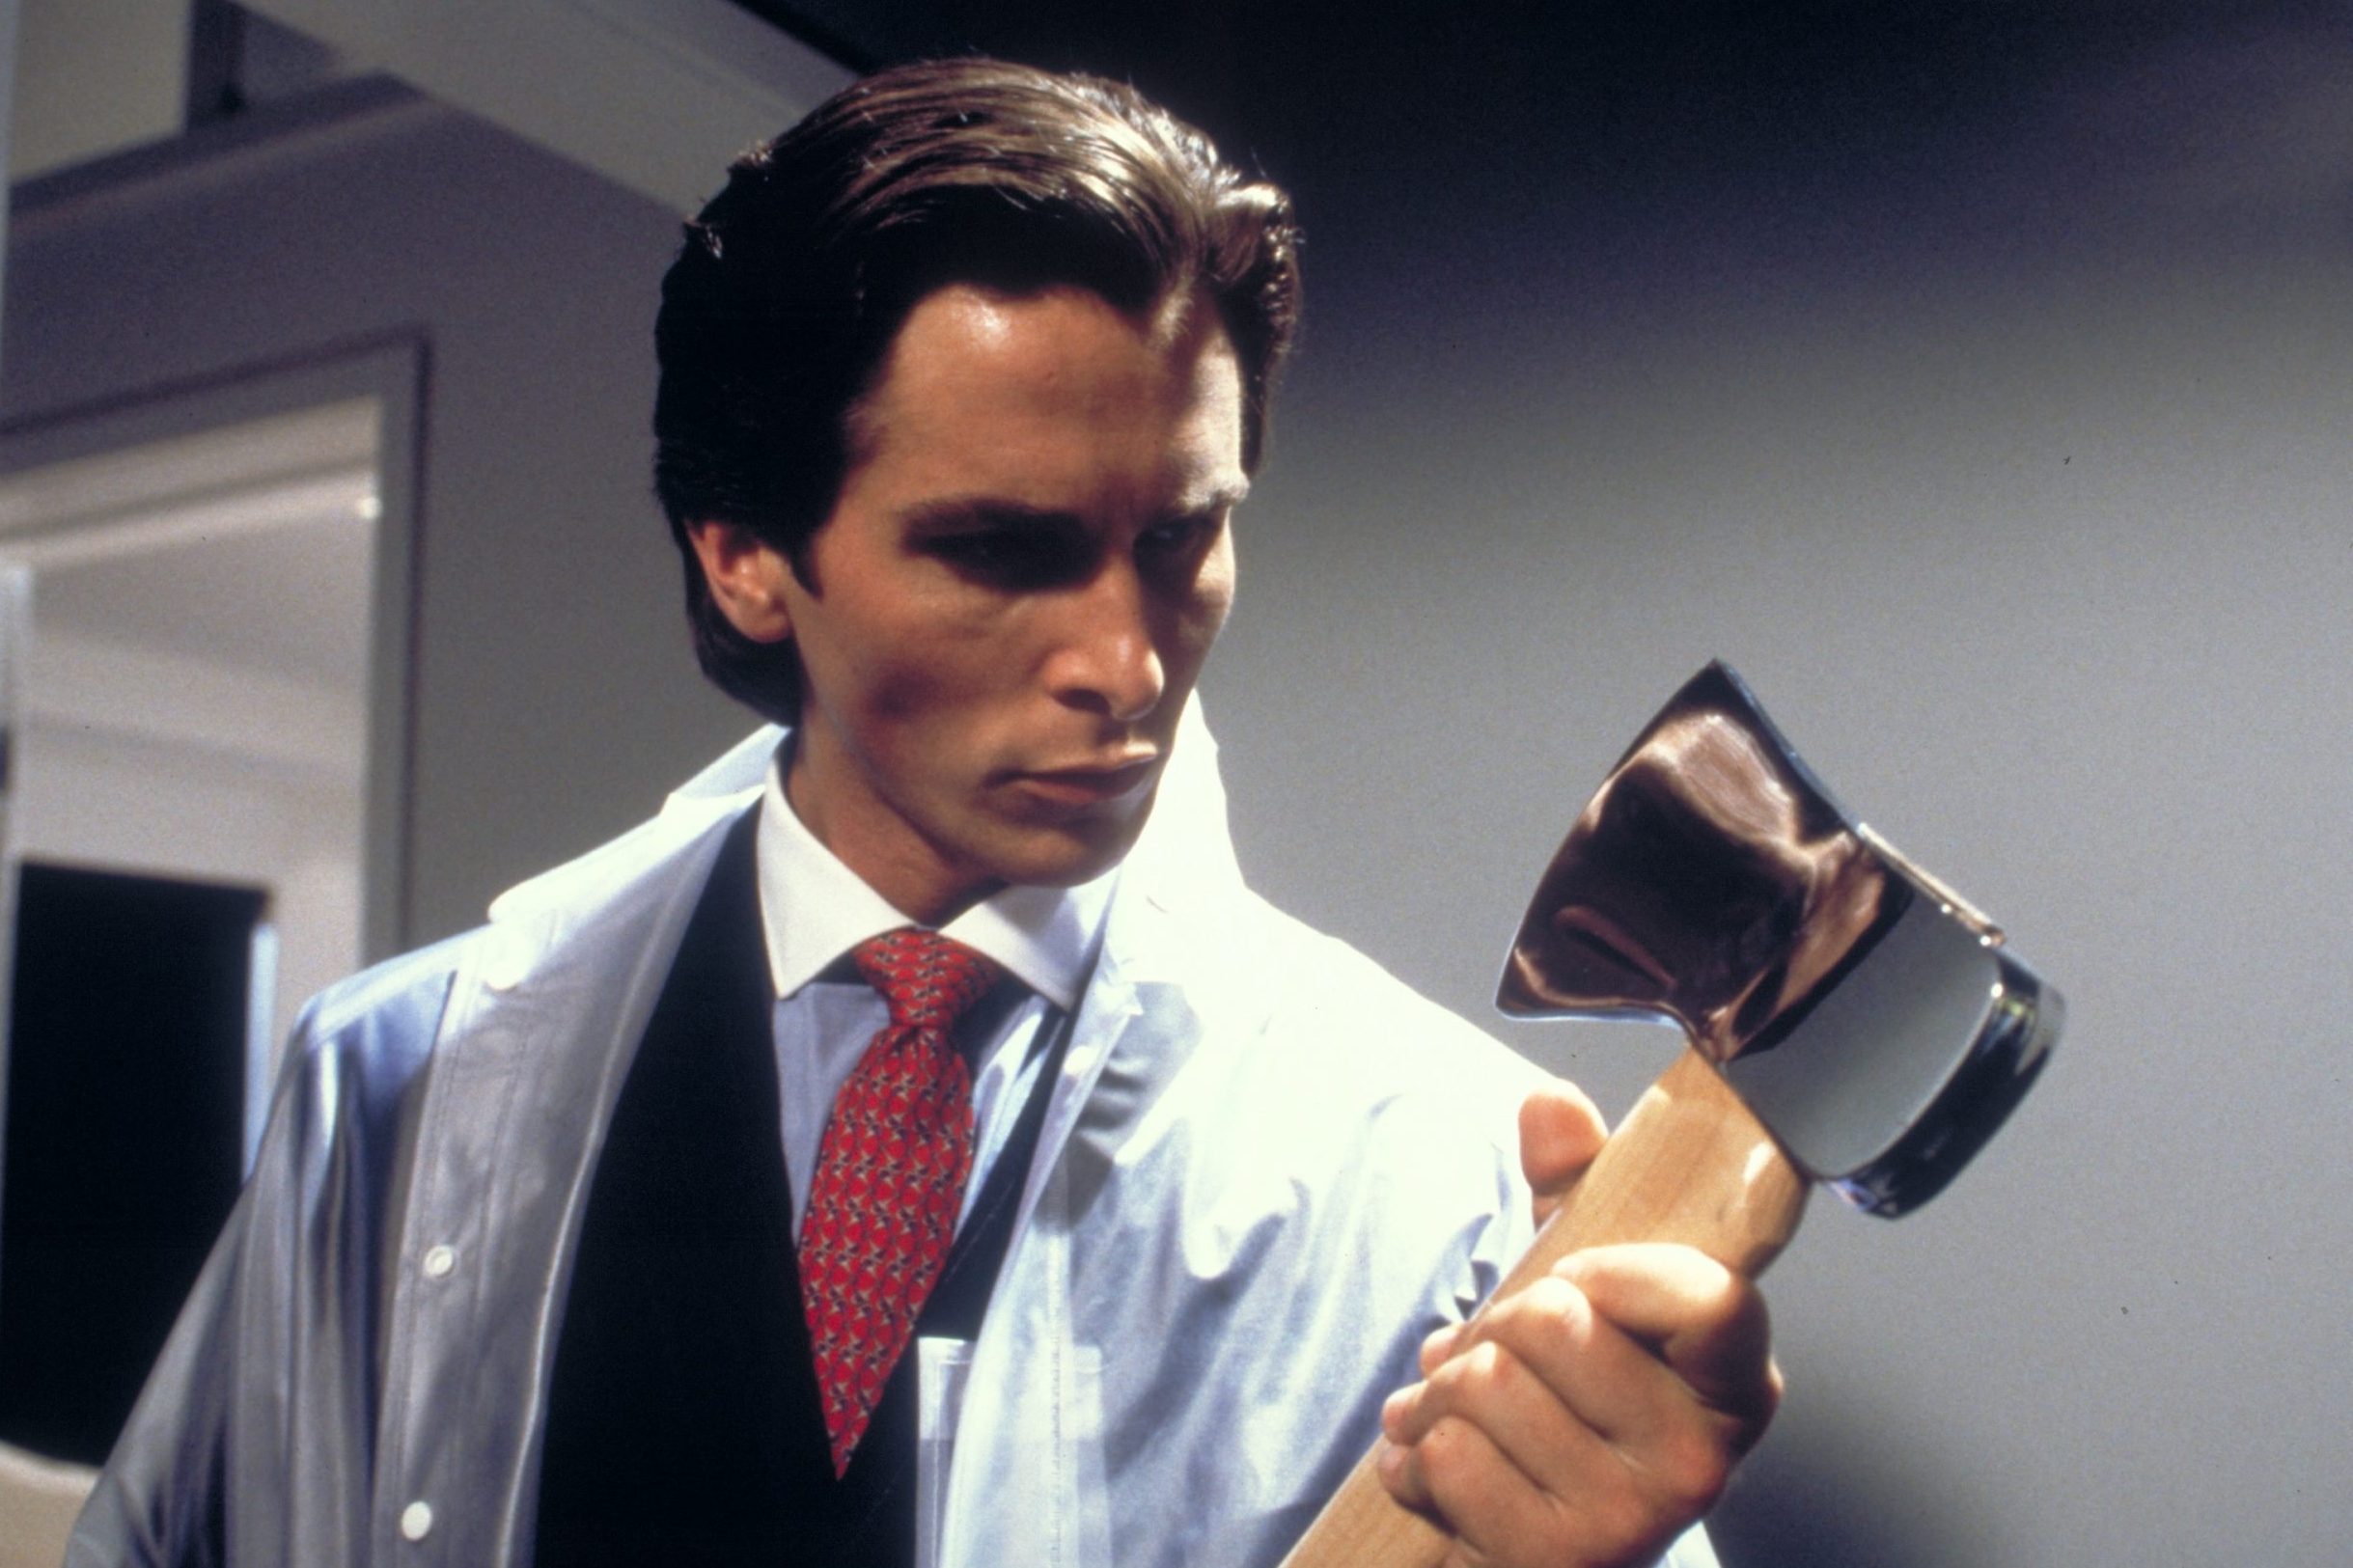 Patrick Bateman is holding an axe looking down on it while holding it in his arms. He's wearing a seethrough coat on top of a business suit.